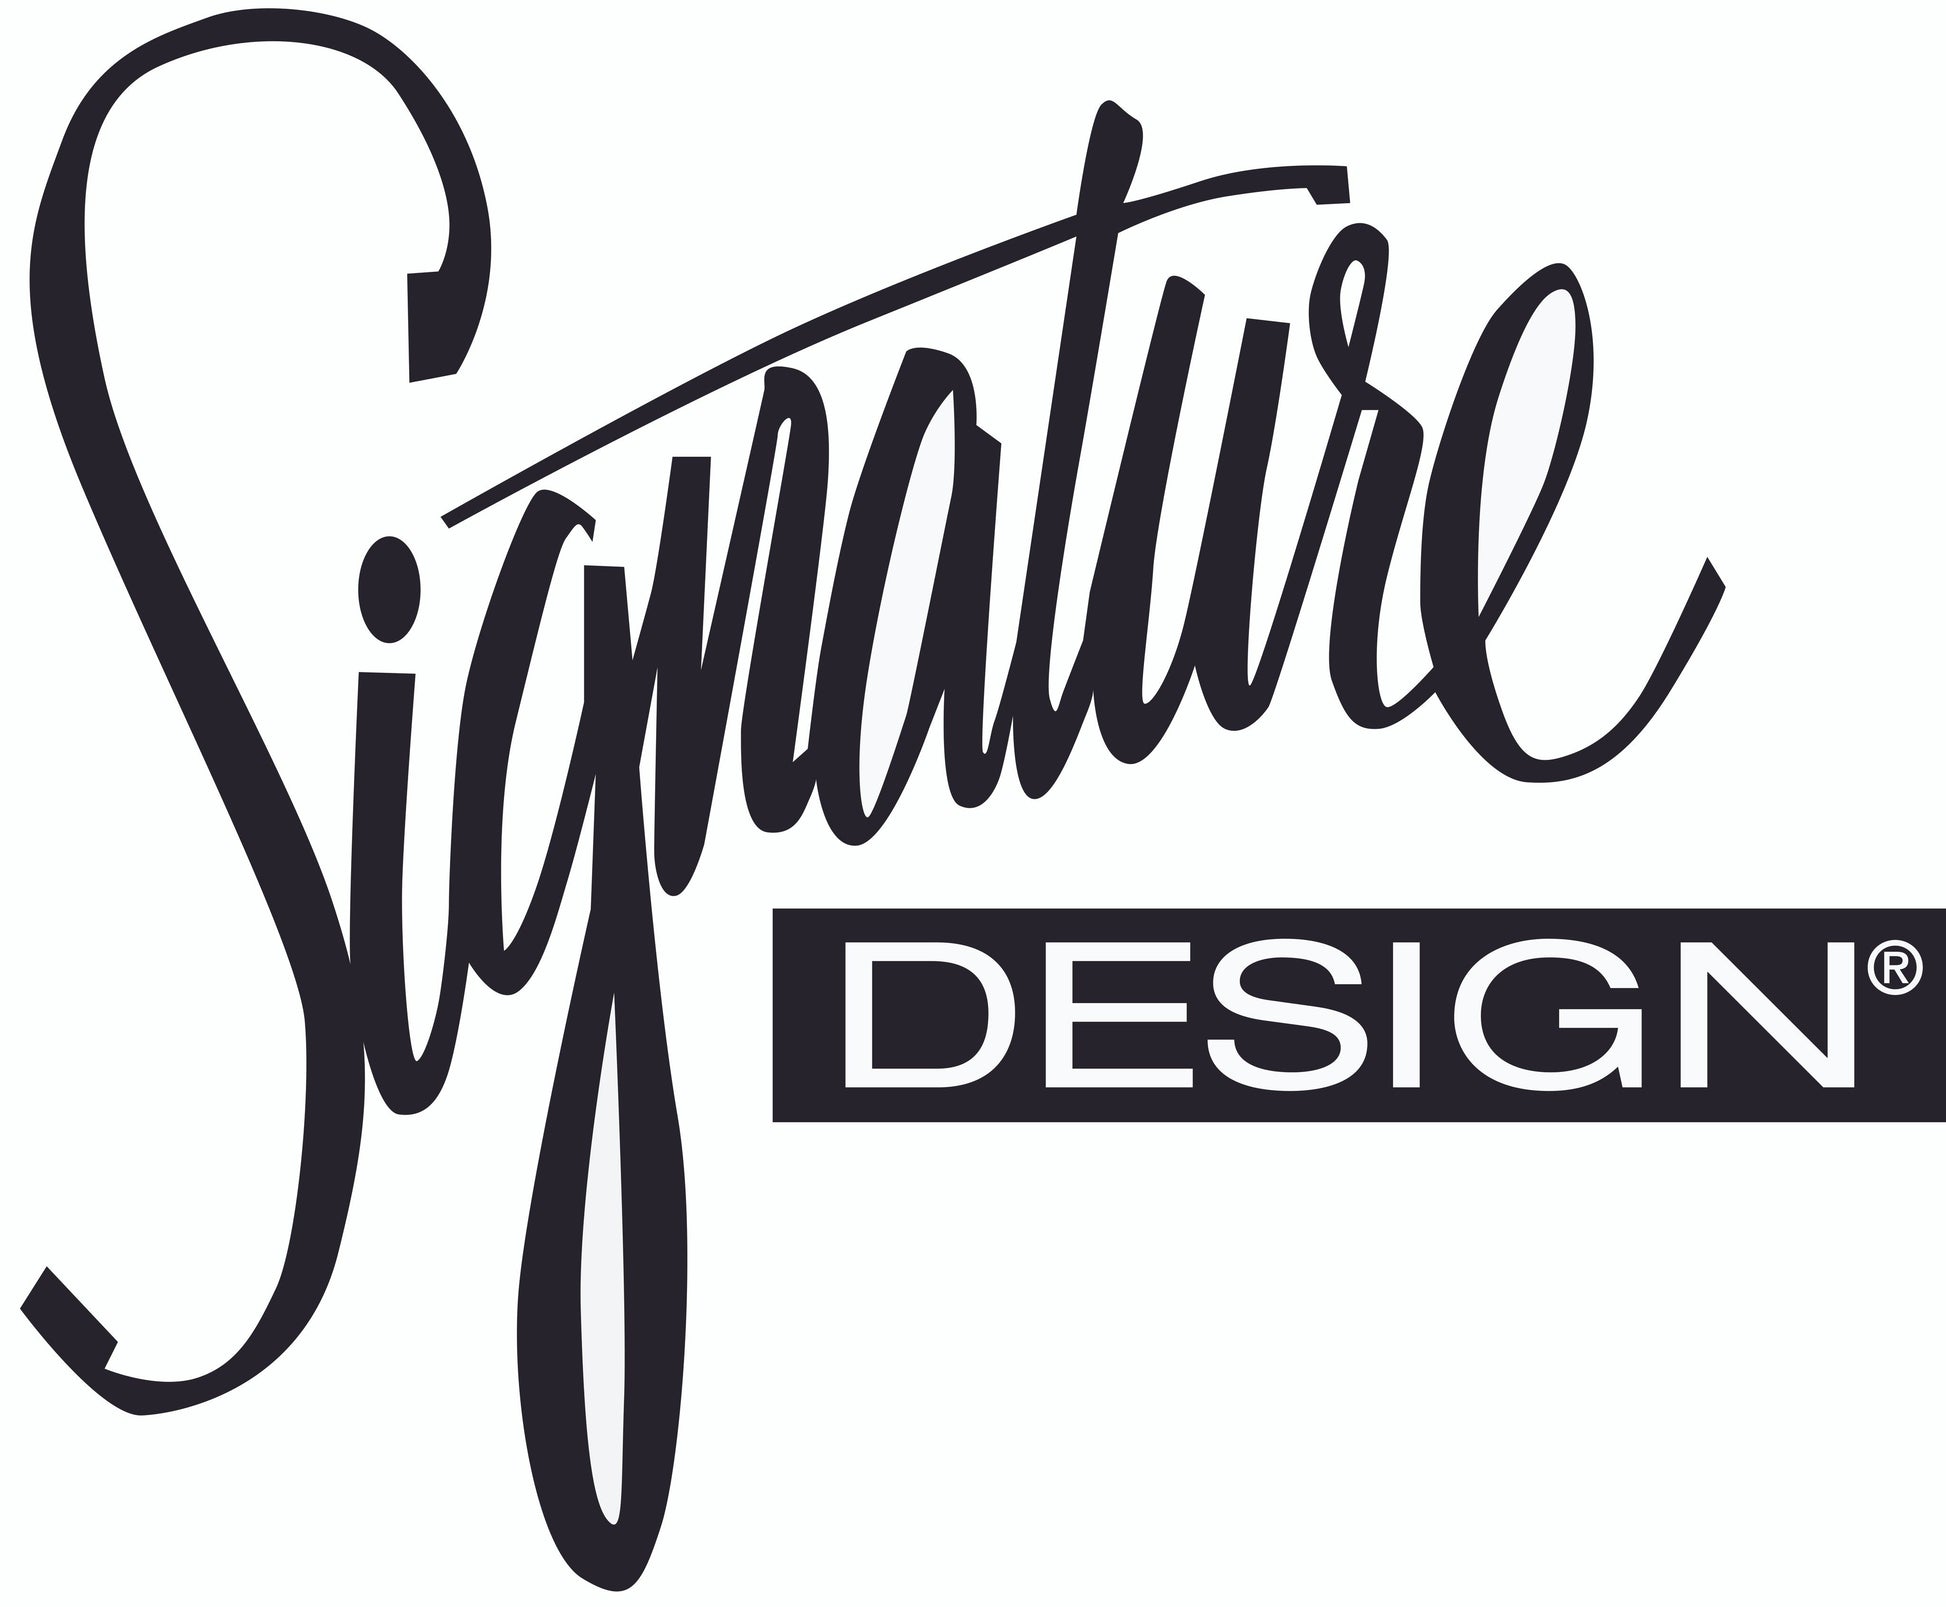 Robbinsdale Dining Room Server Signature Design by Ashley®